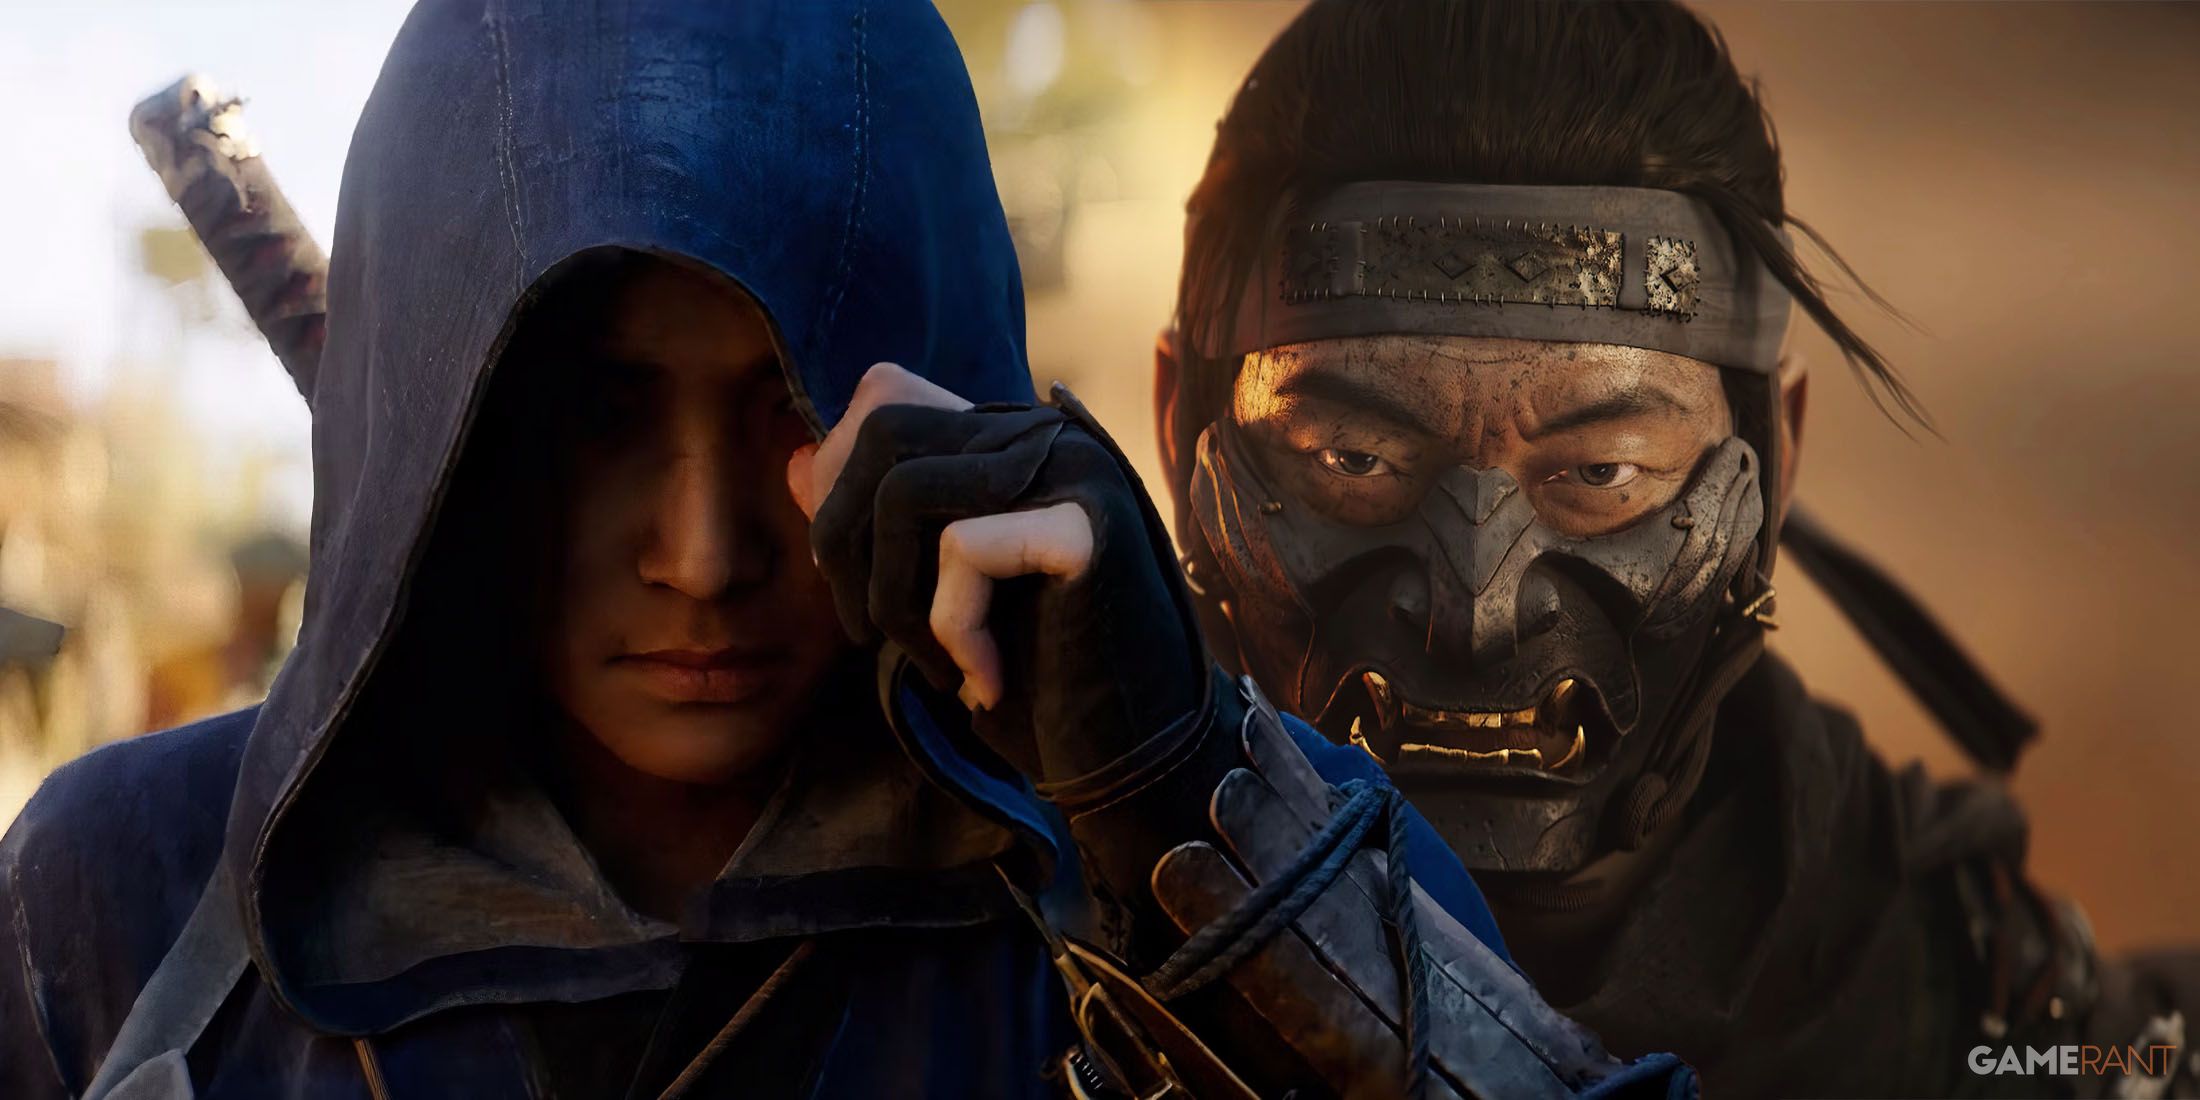 Naoe from Assassin's Creed Shadows and Jin Sakai from Ghost of Tsushima